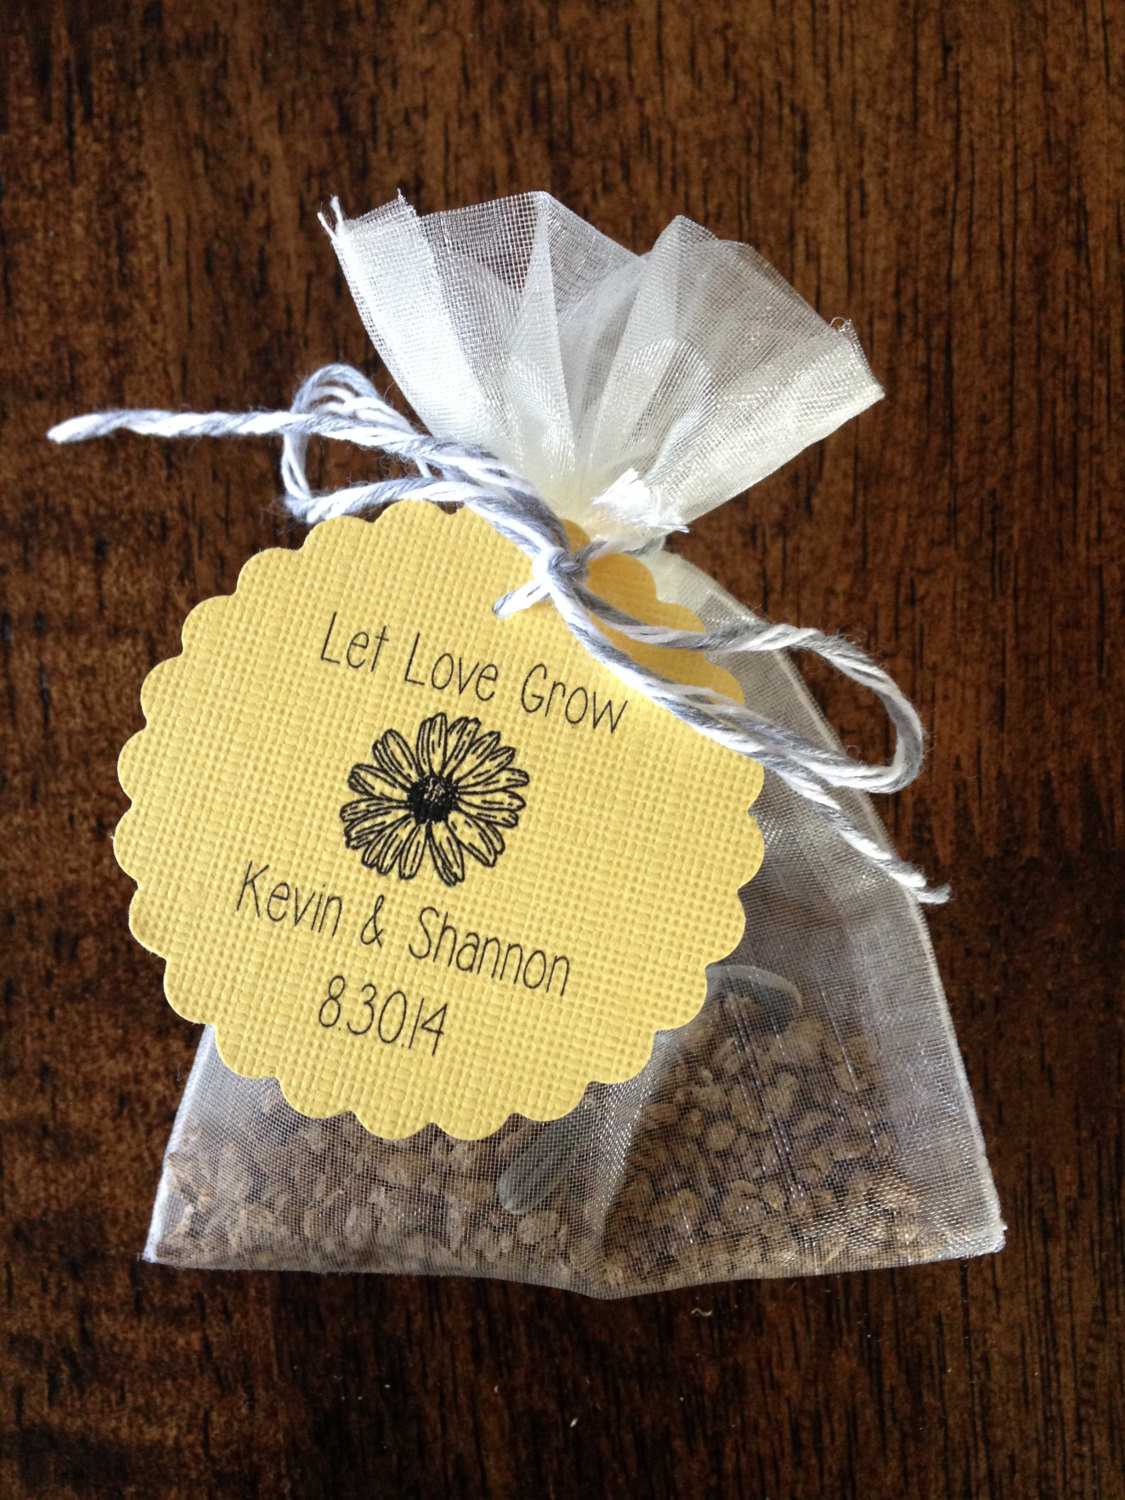 Flower Seed Wedding Favors
 Flower Seed Wedding Favors Events Weddings by